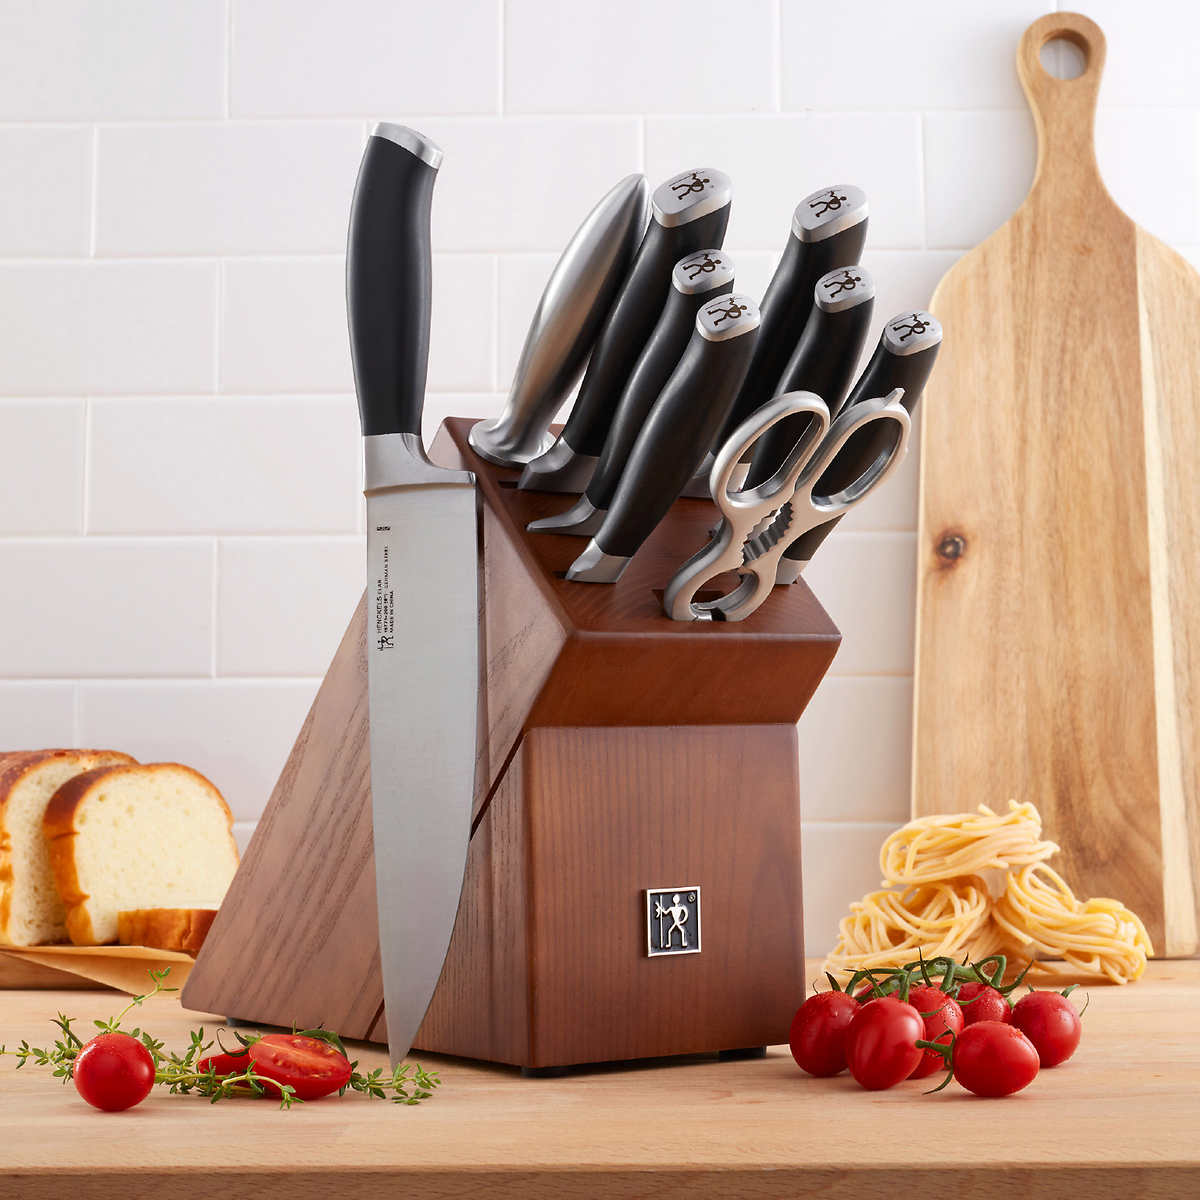 Costco's Henckels Cutting Board Set Is Too Good to Pass Up